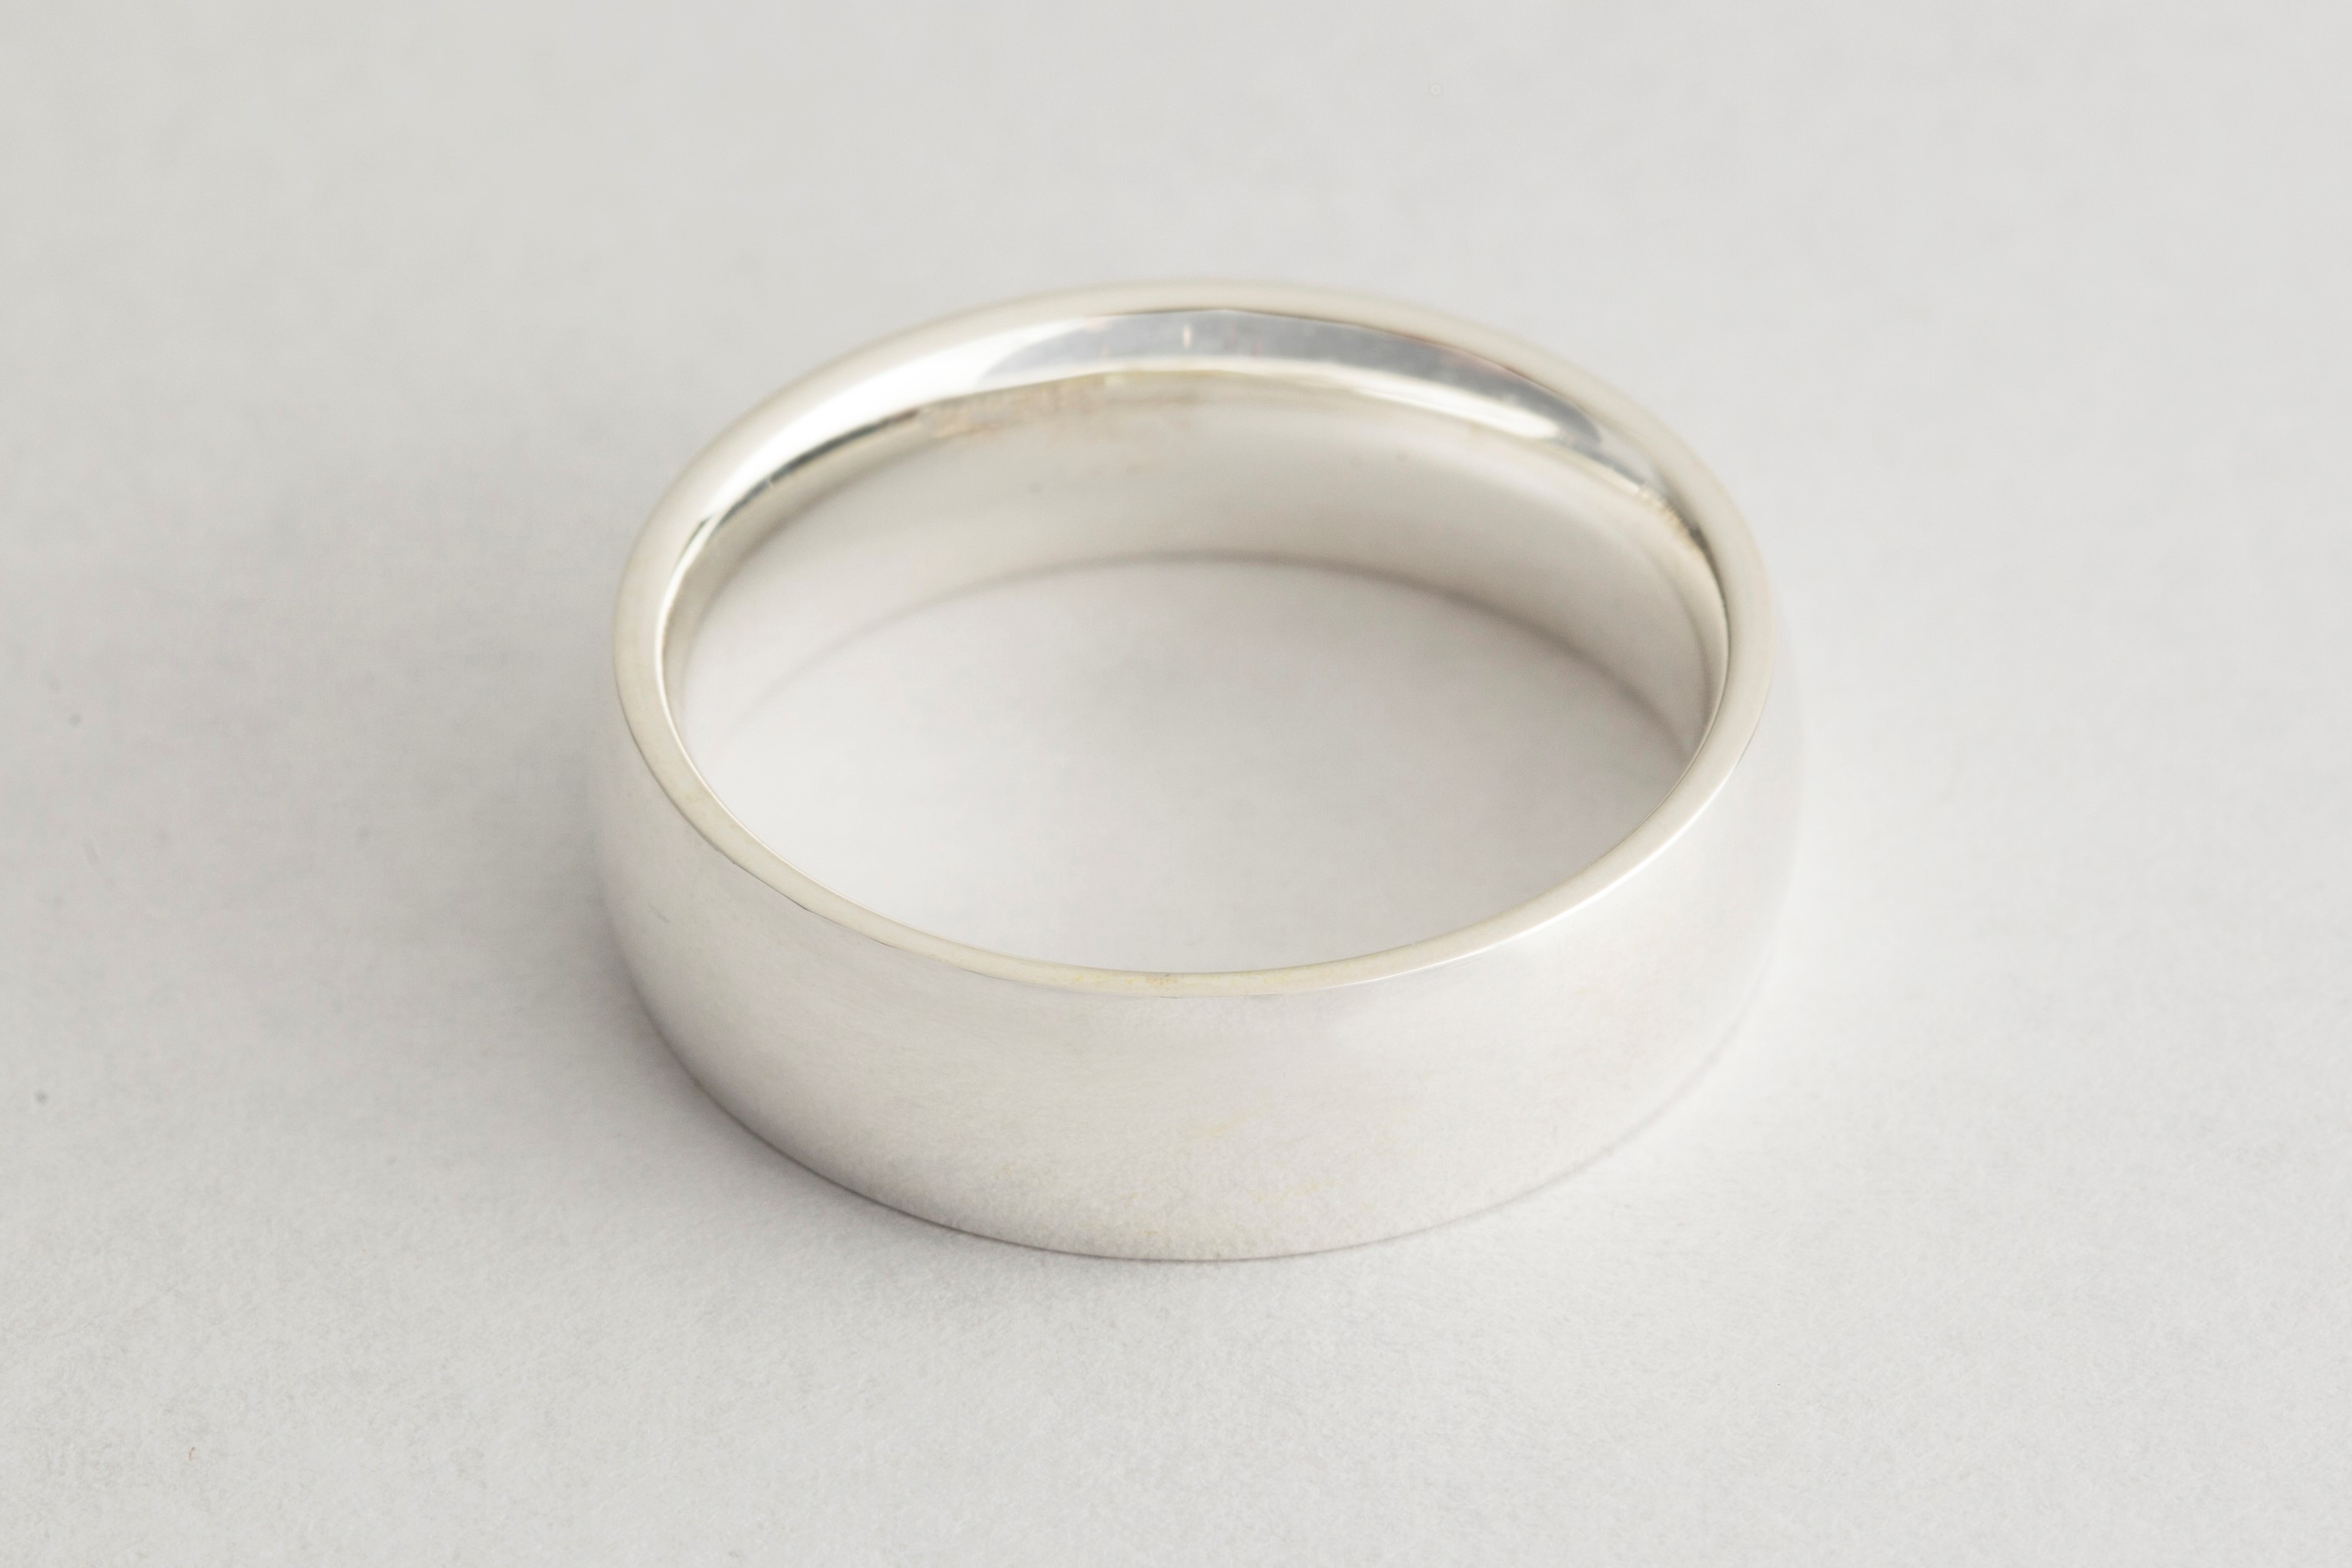 Wedding ring electroplated with silver plating solution